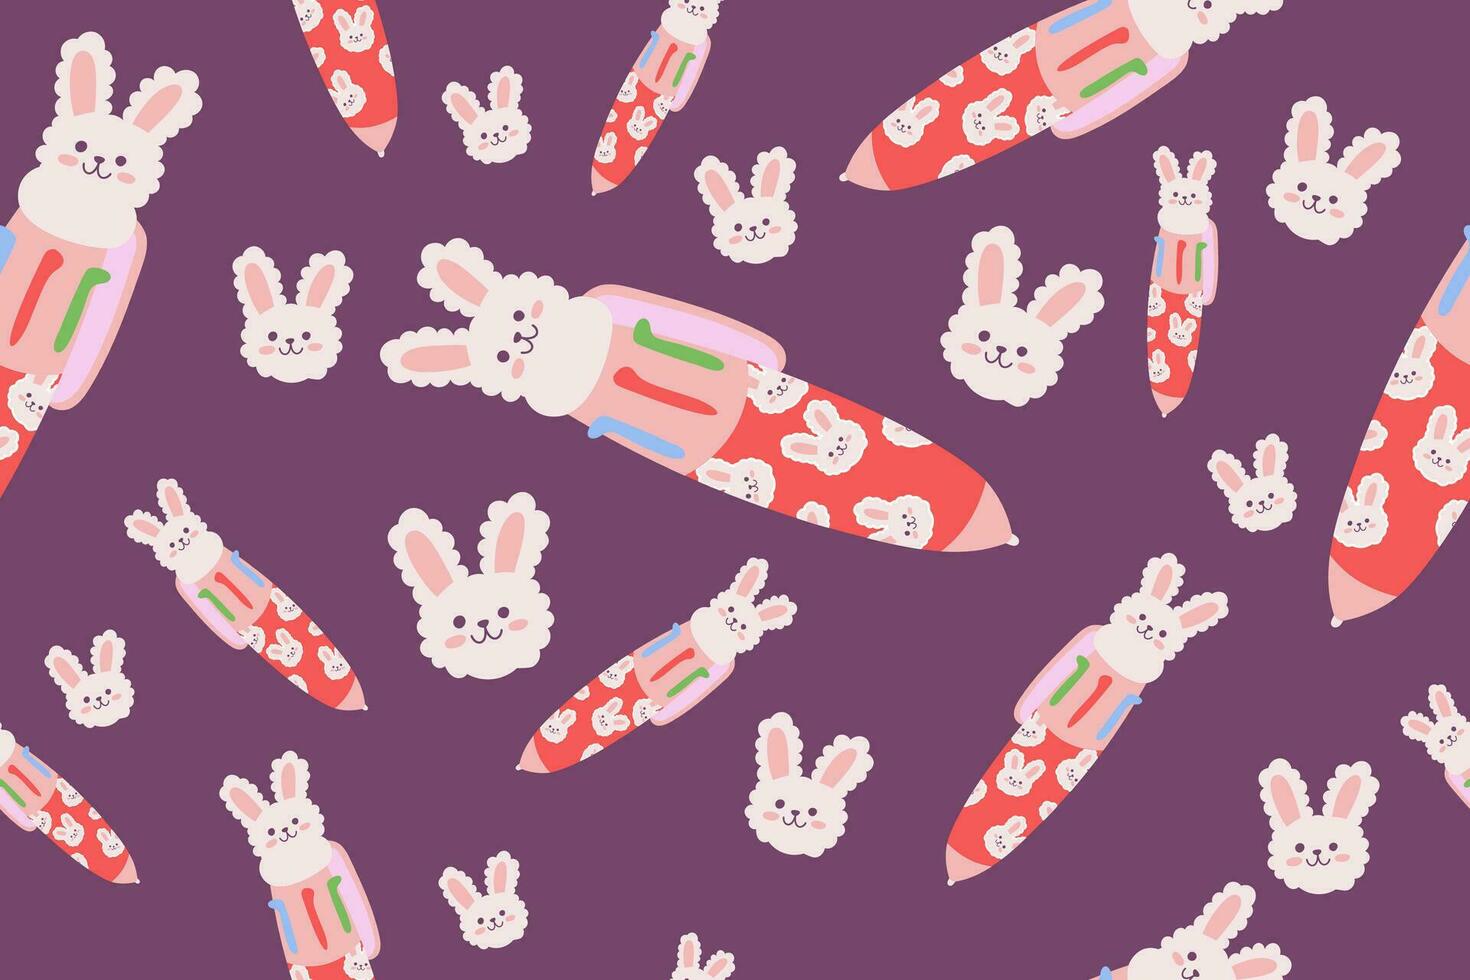 Cute Stationery and office supply Seamless Pattern Background. Back to school theme for wrapping paper, textile, or apparel vector